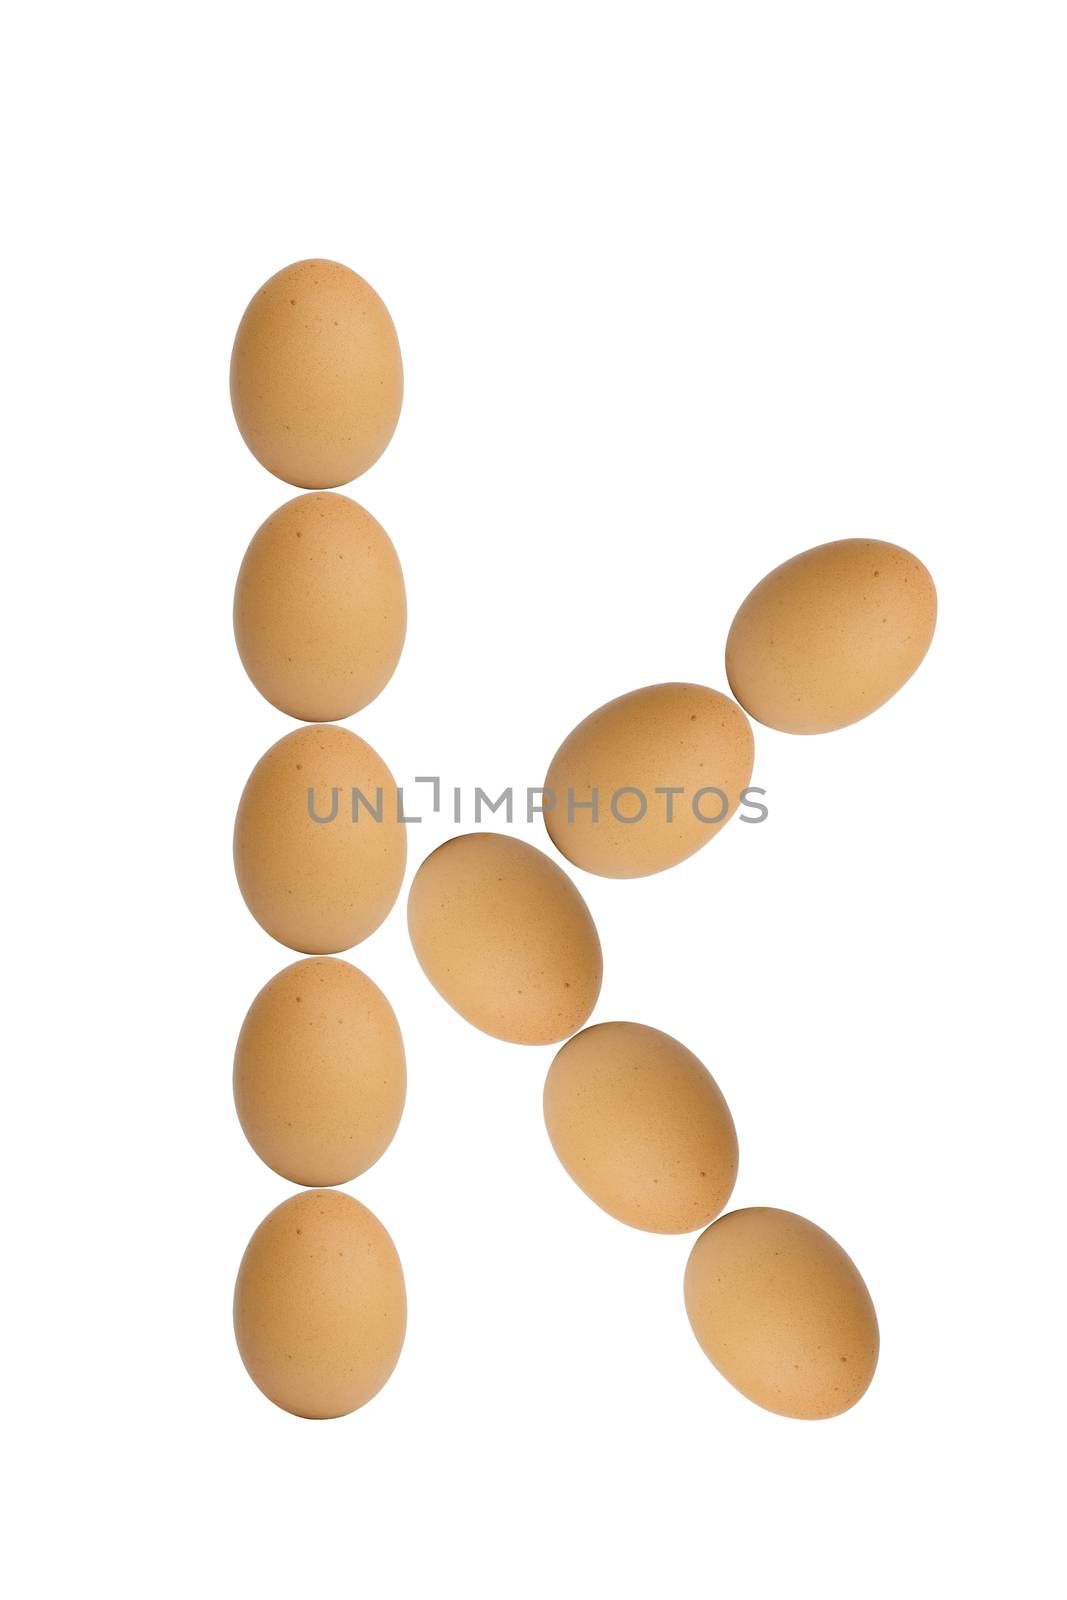 Alphabets  A to Z from brown eggs alphabet isolated on white background, k